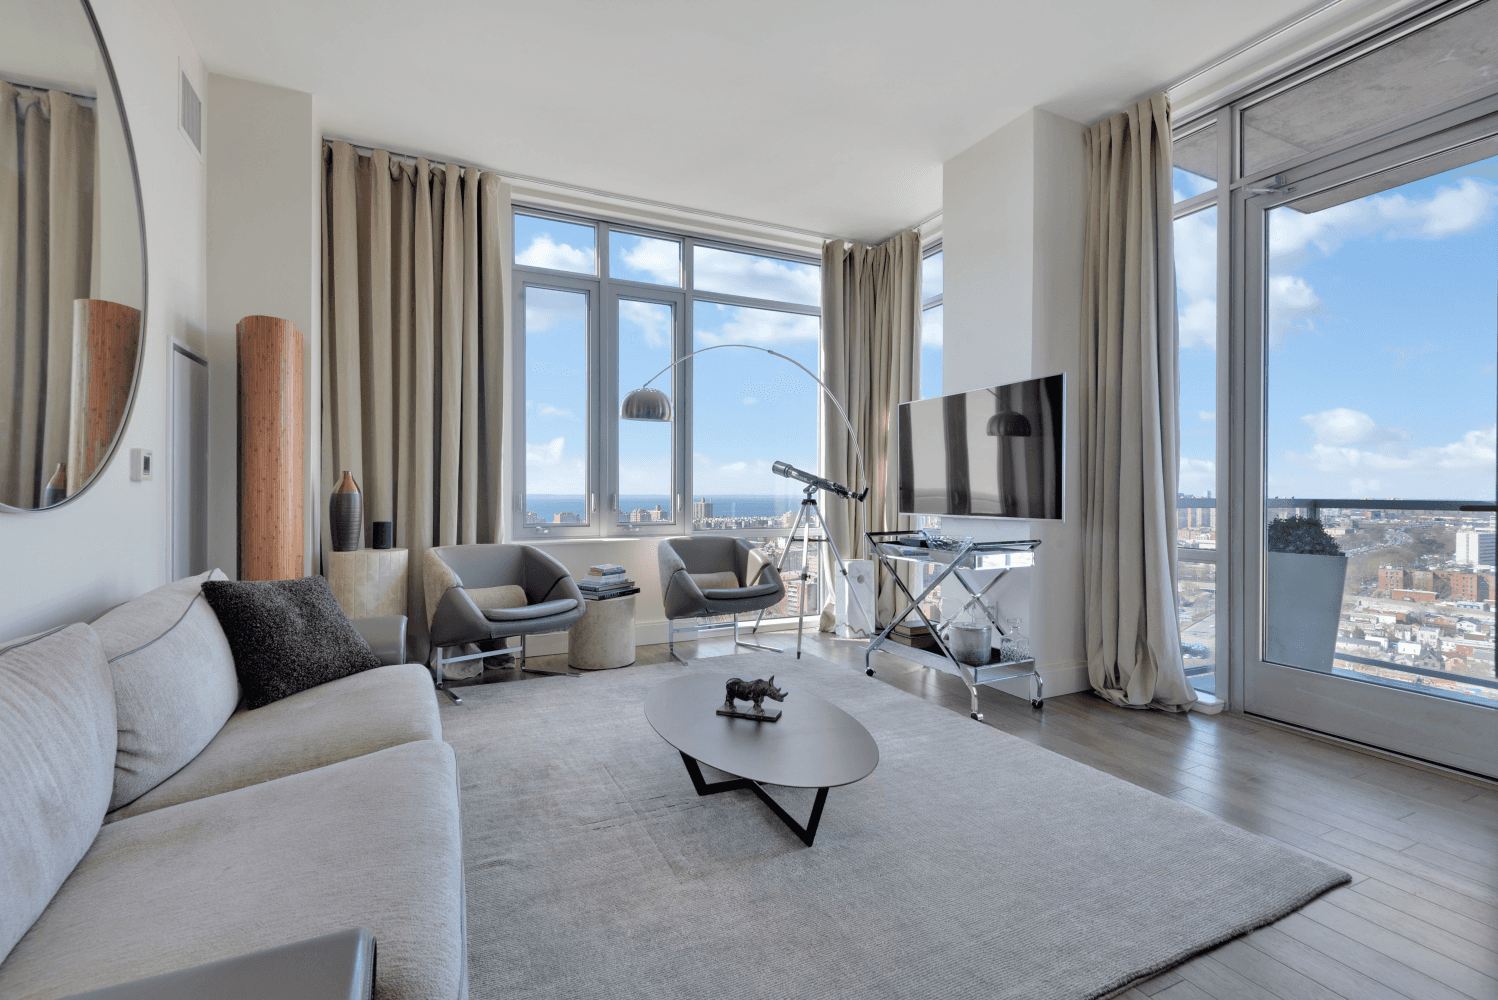 Introducing Unit 24B A refined two bedroom, two bathroom sun drenched residence in the luxurious 1 Brooklyn Bay Condominium.